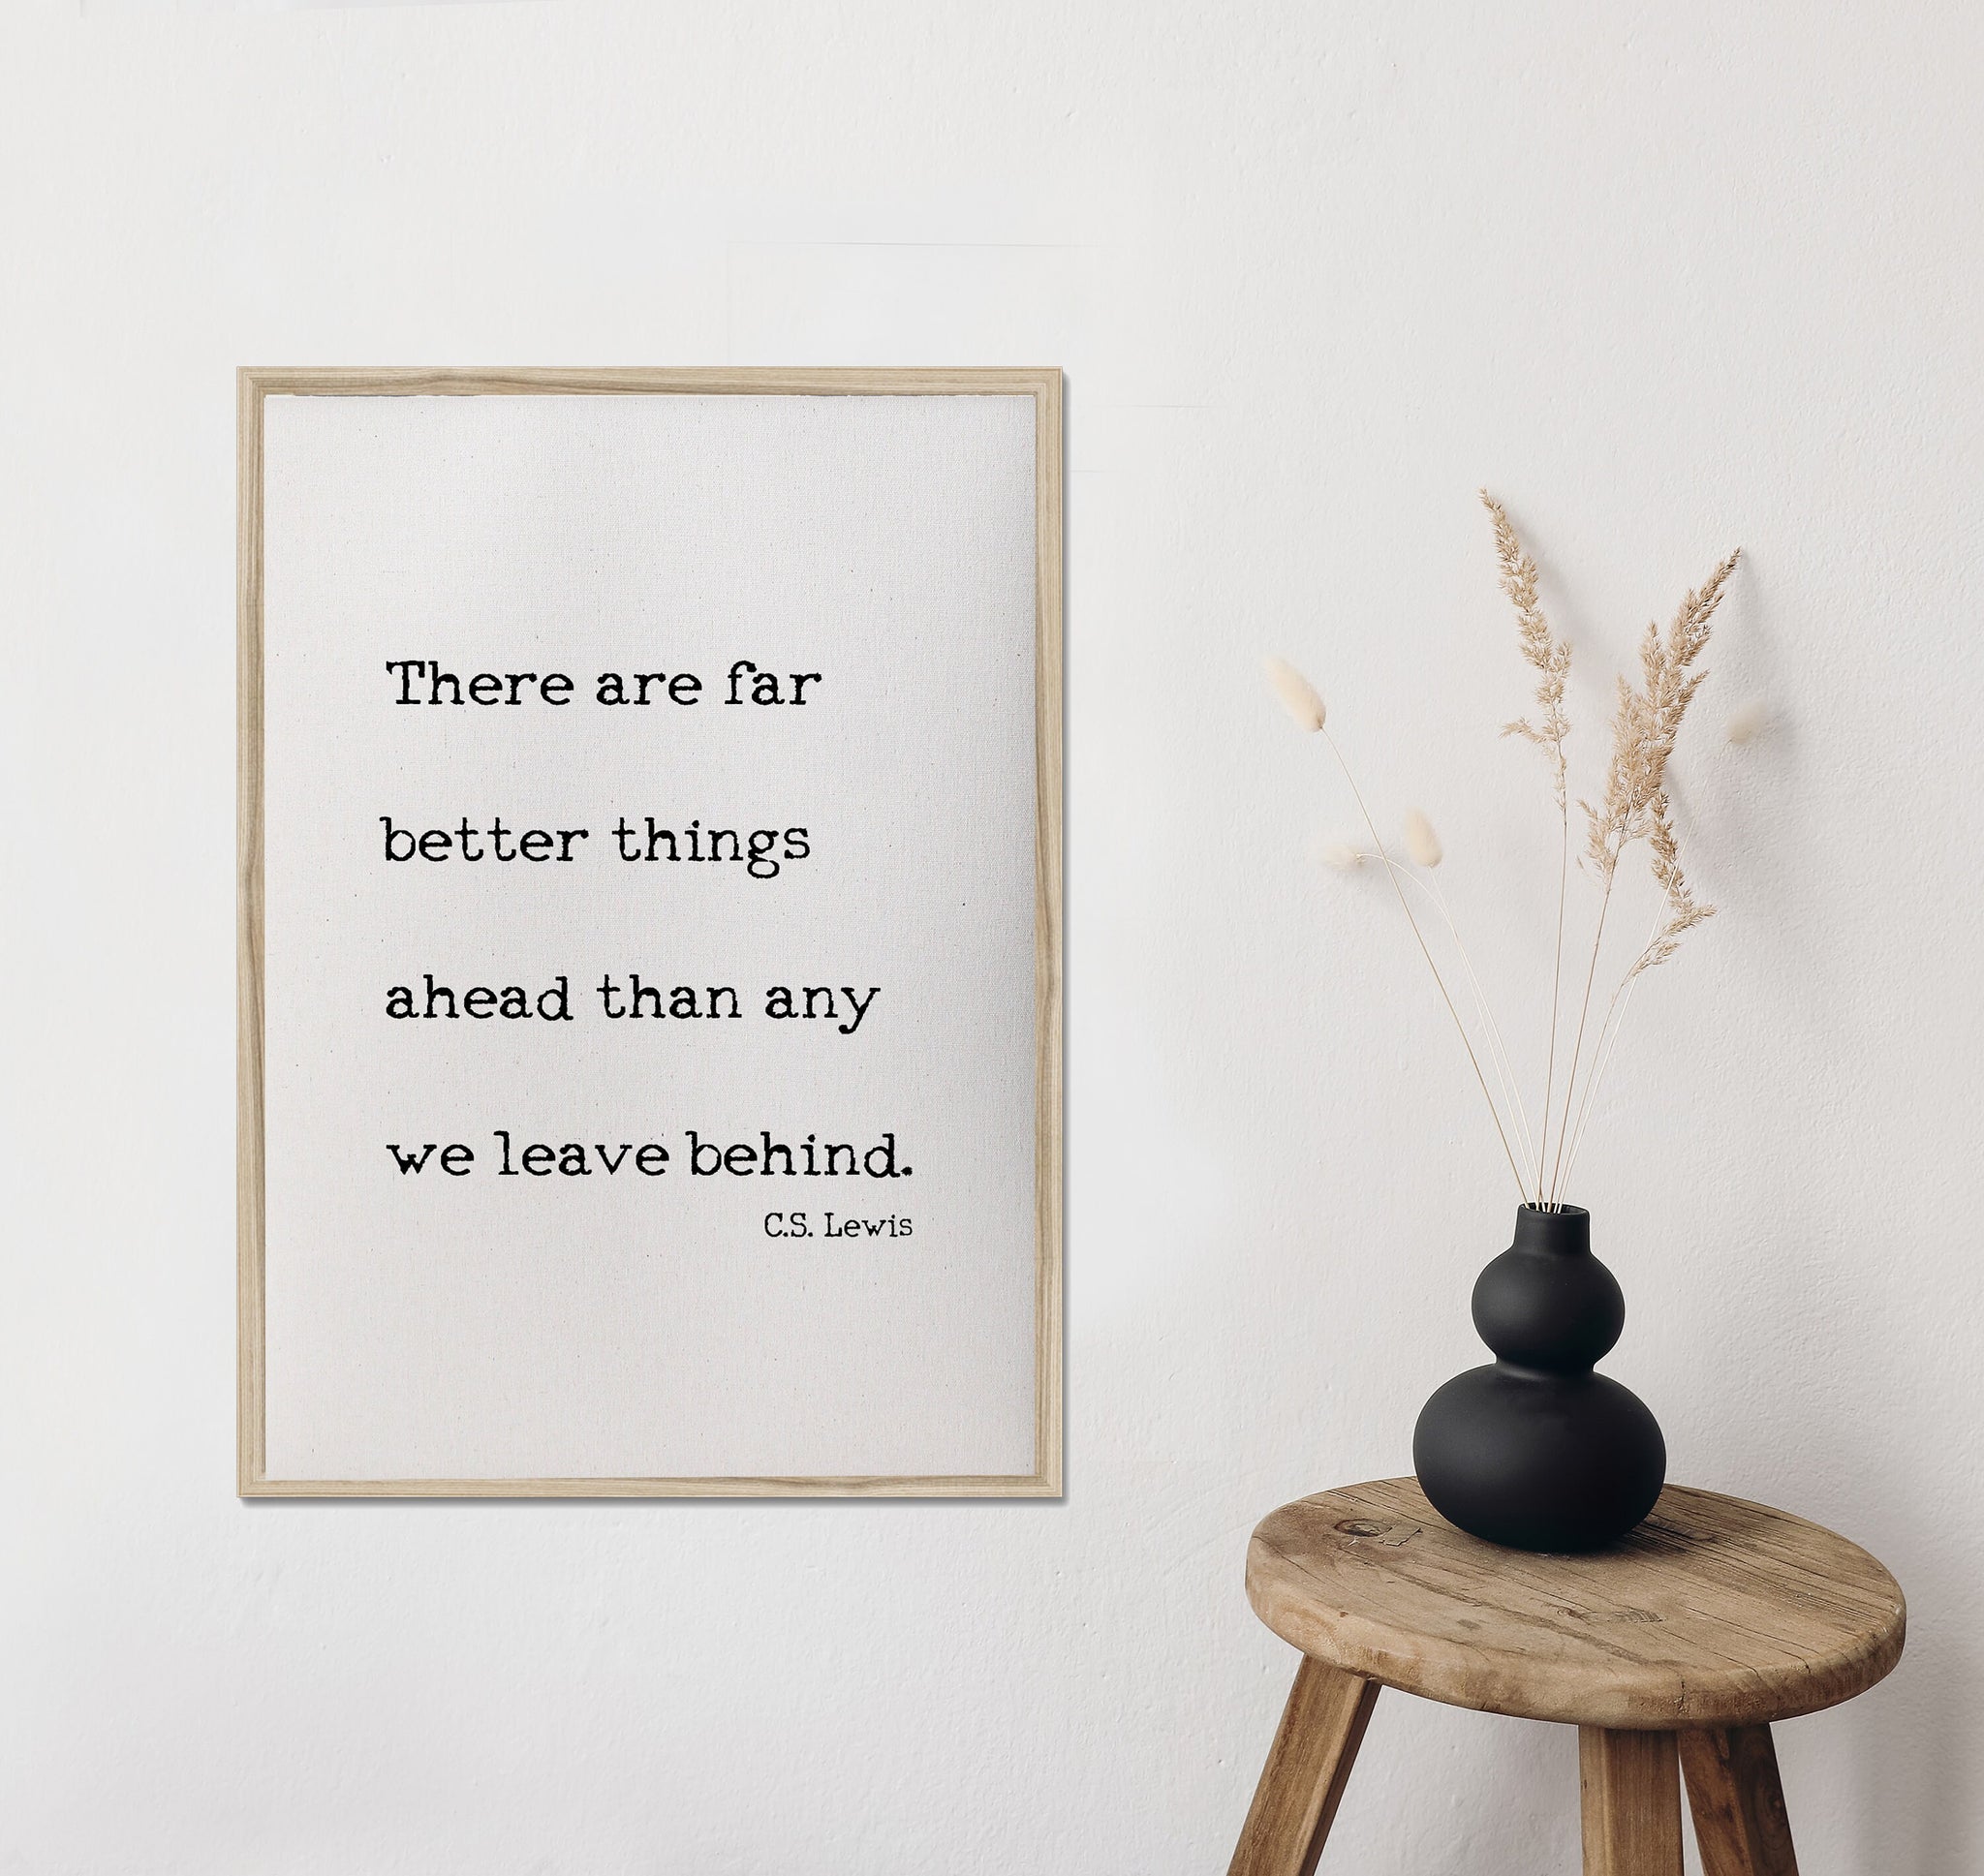 C.S. Lewis quote/there are far better things ahead than any we leave behind/canvas print/home decor/wall art